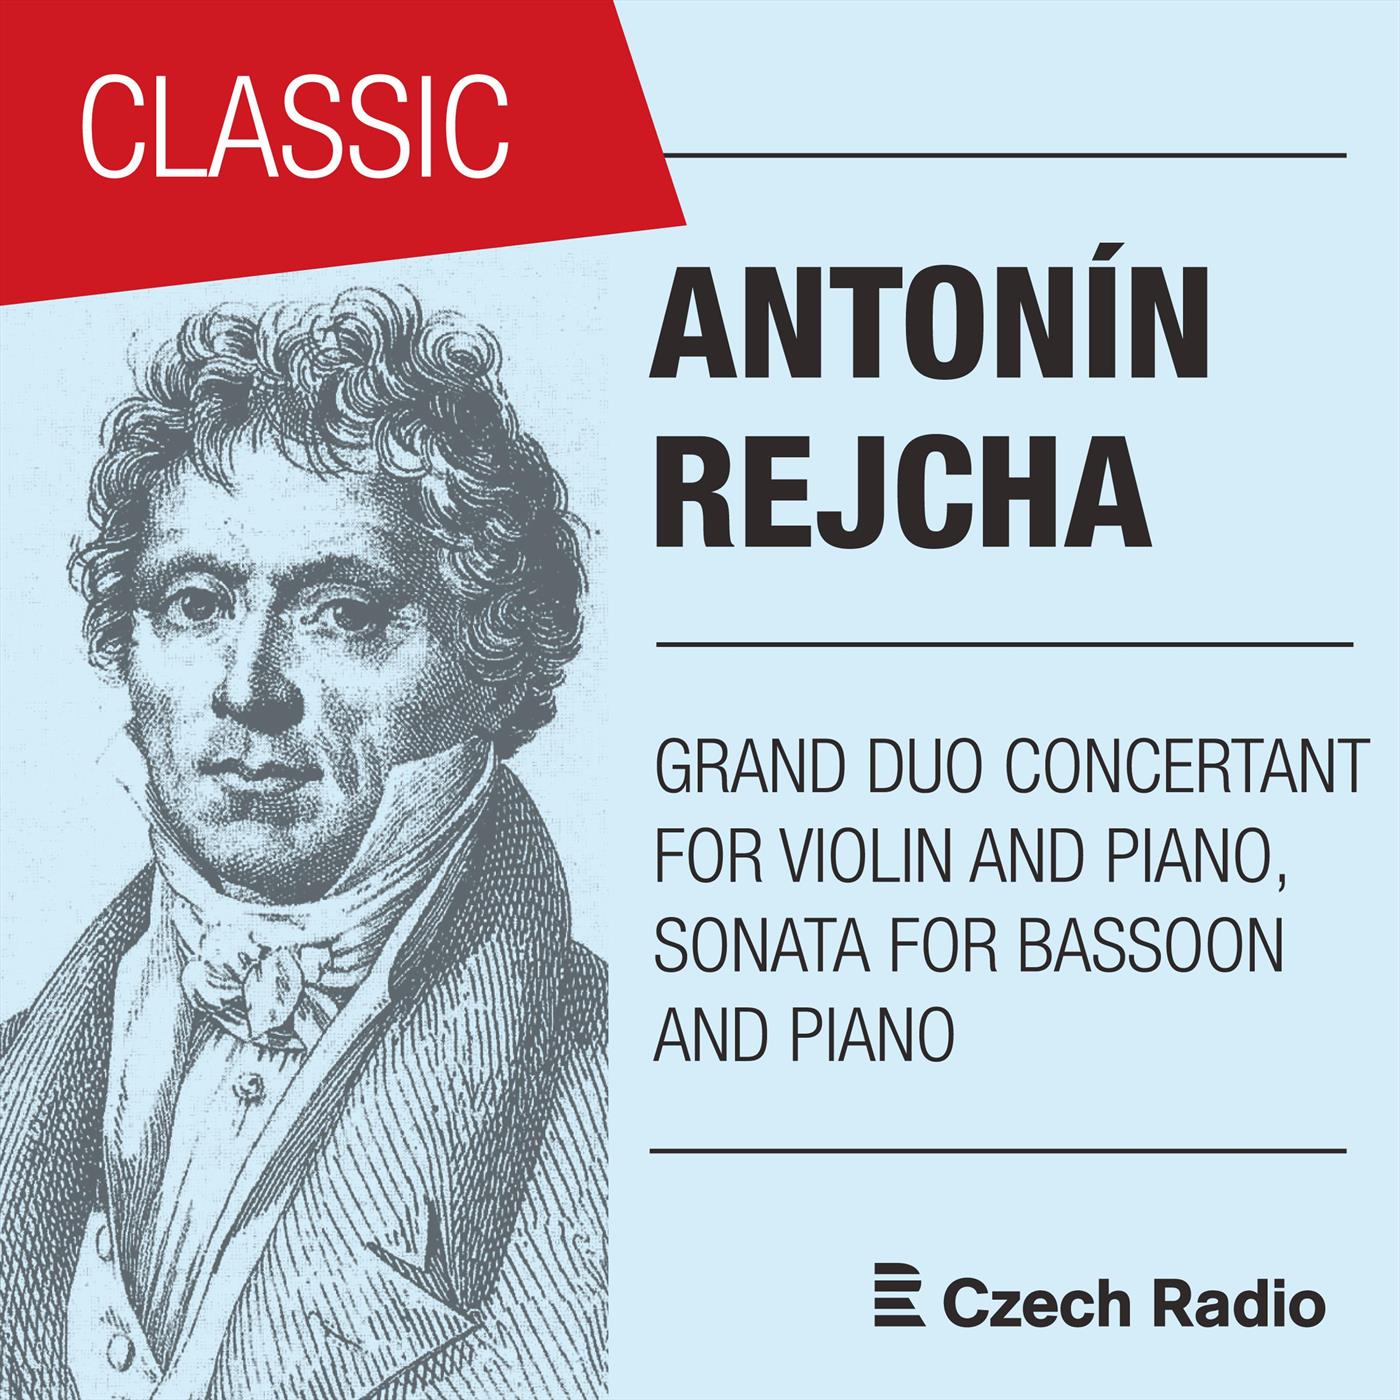 Grand Duo Concertant for Violin and Piano A Major: I. Allegro